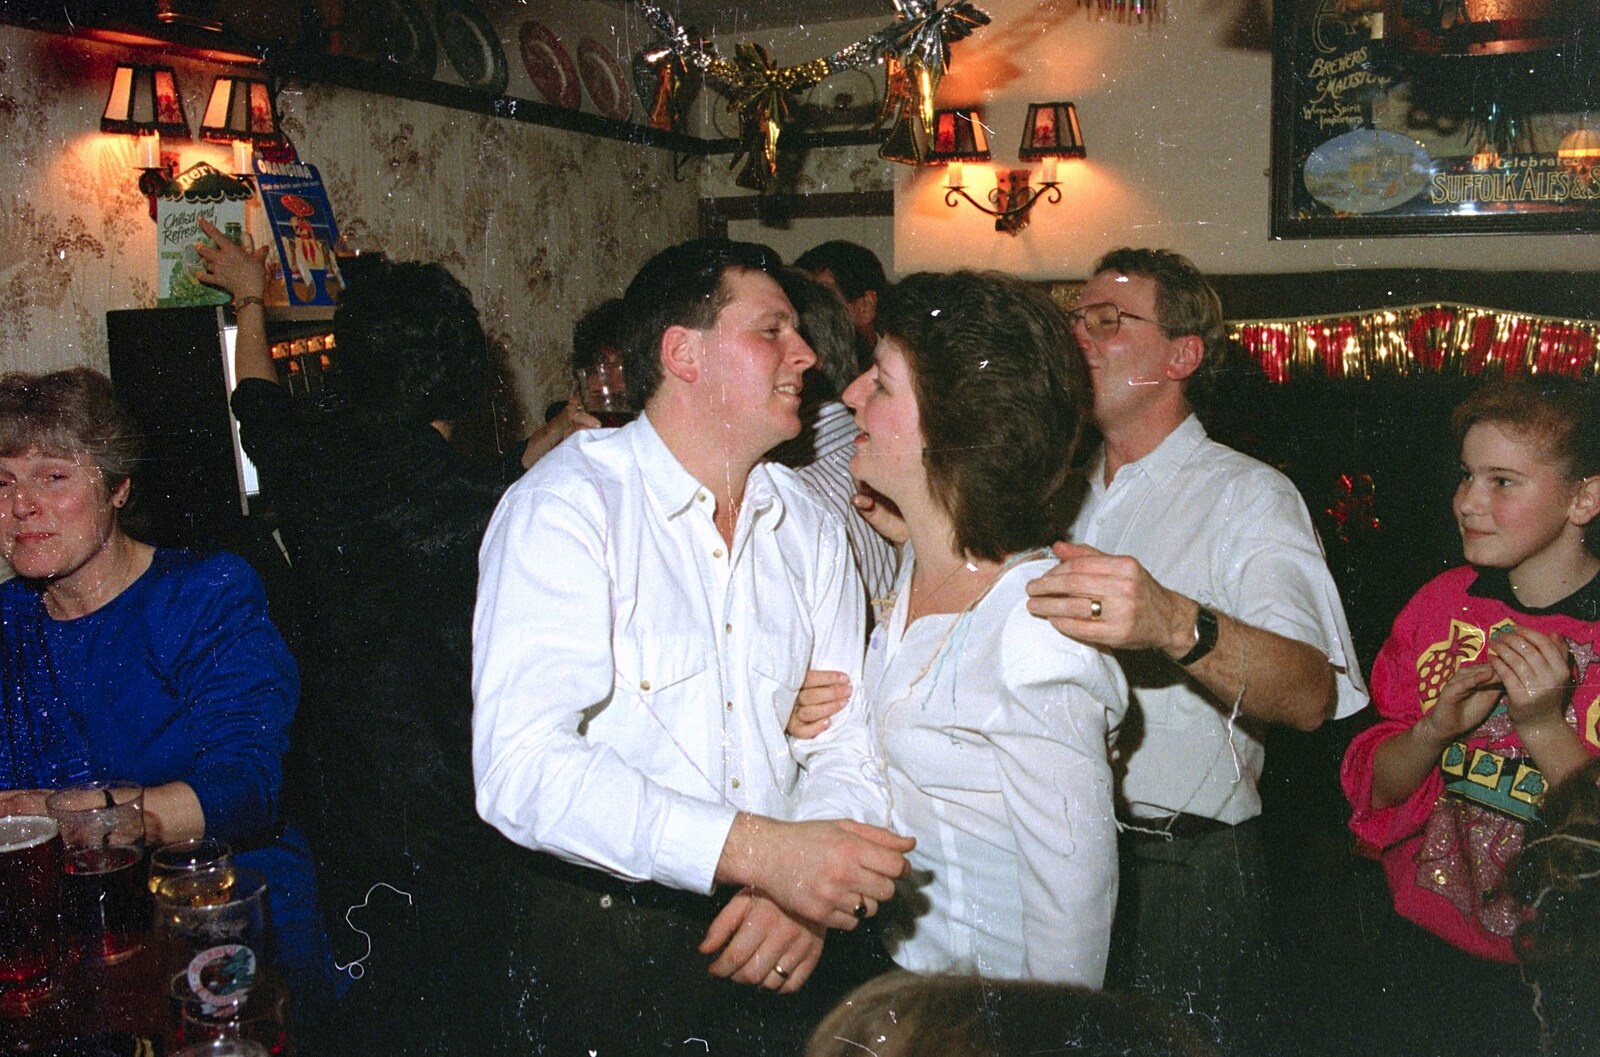 Barry and Davina from New Year's Eve at the Swan Inn, Brome, Suffolk - 31st December 1991